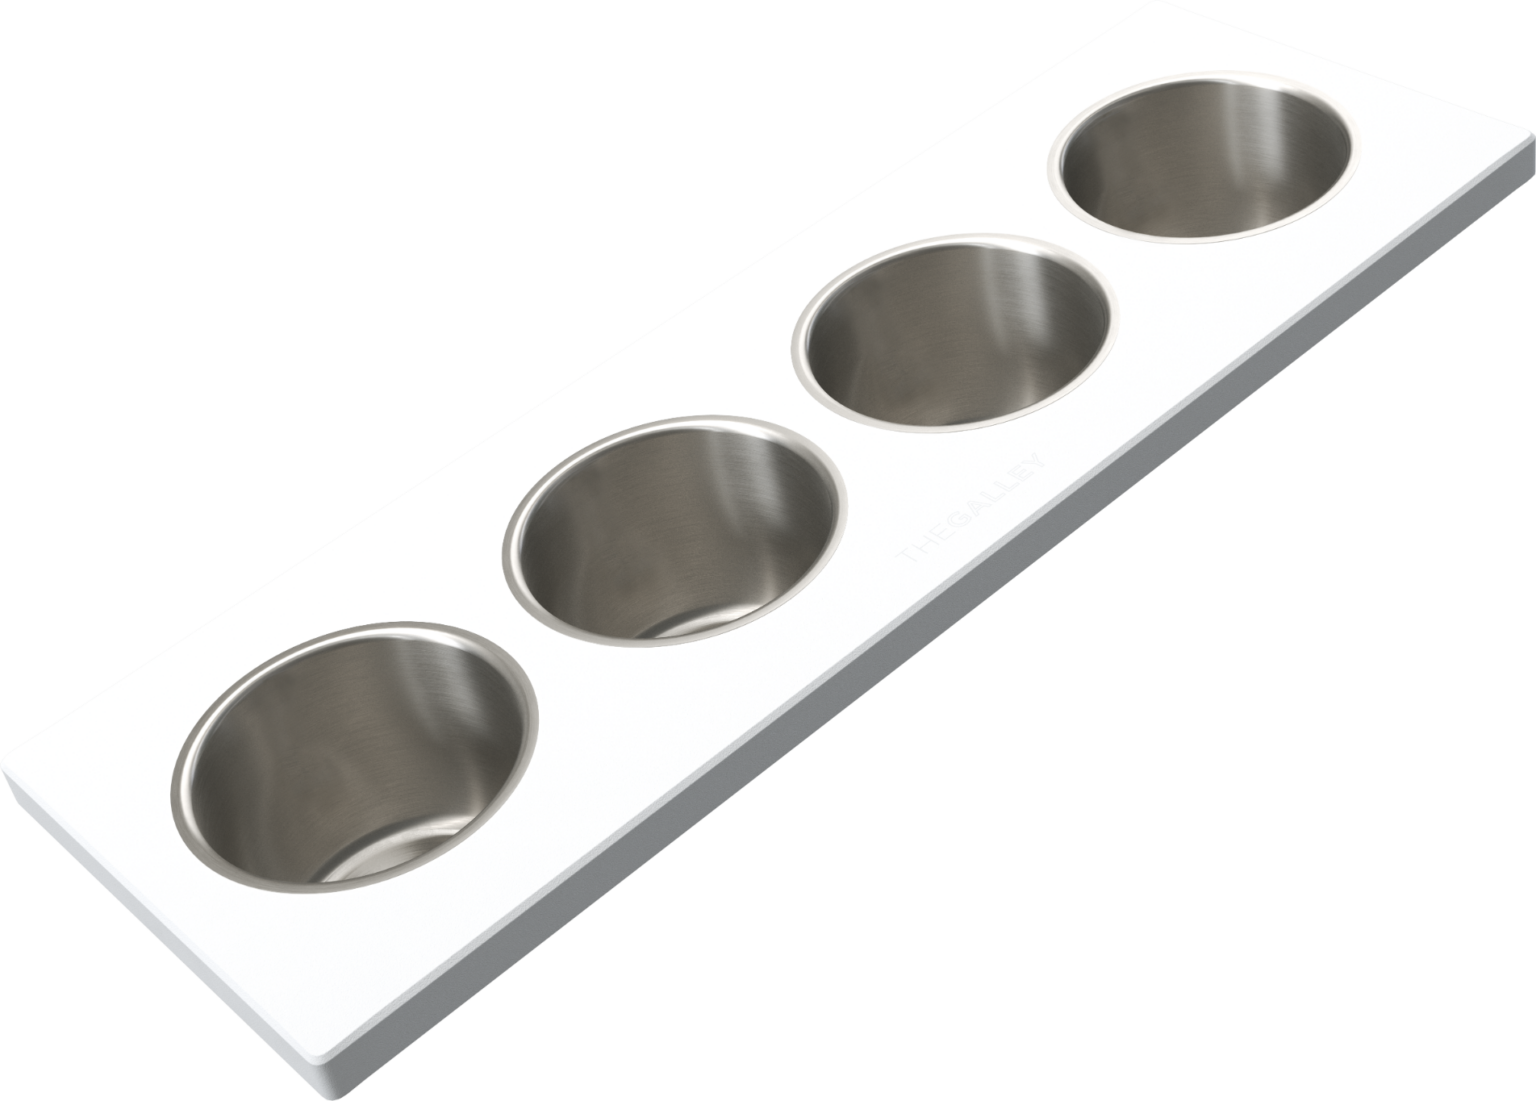 The Galley Upper Tier Garnish Board 6" x 18" with Four Stainless Steel Bowls 4"